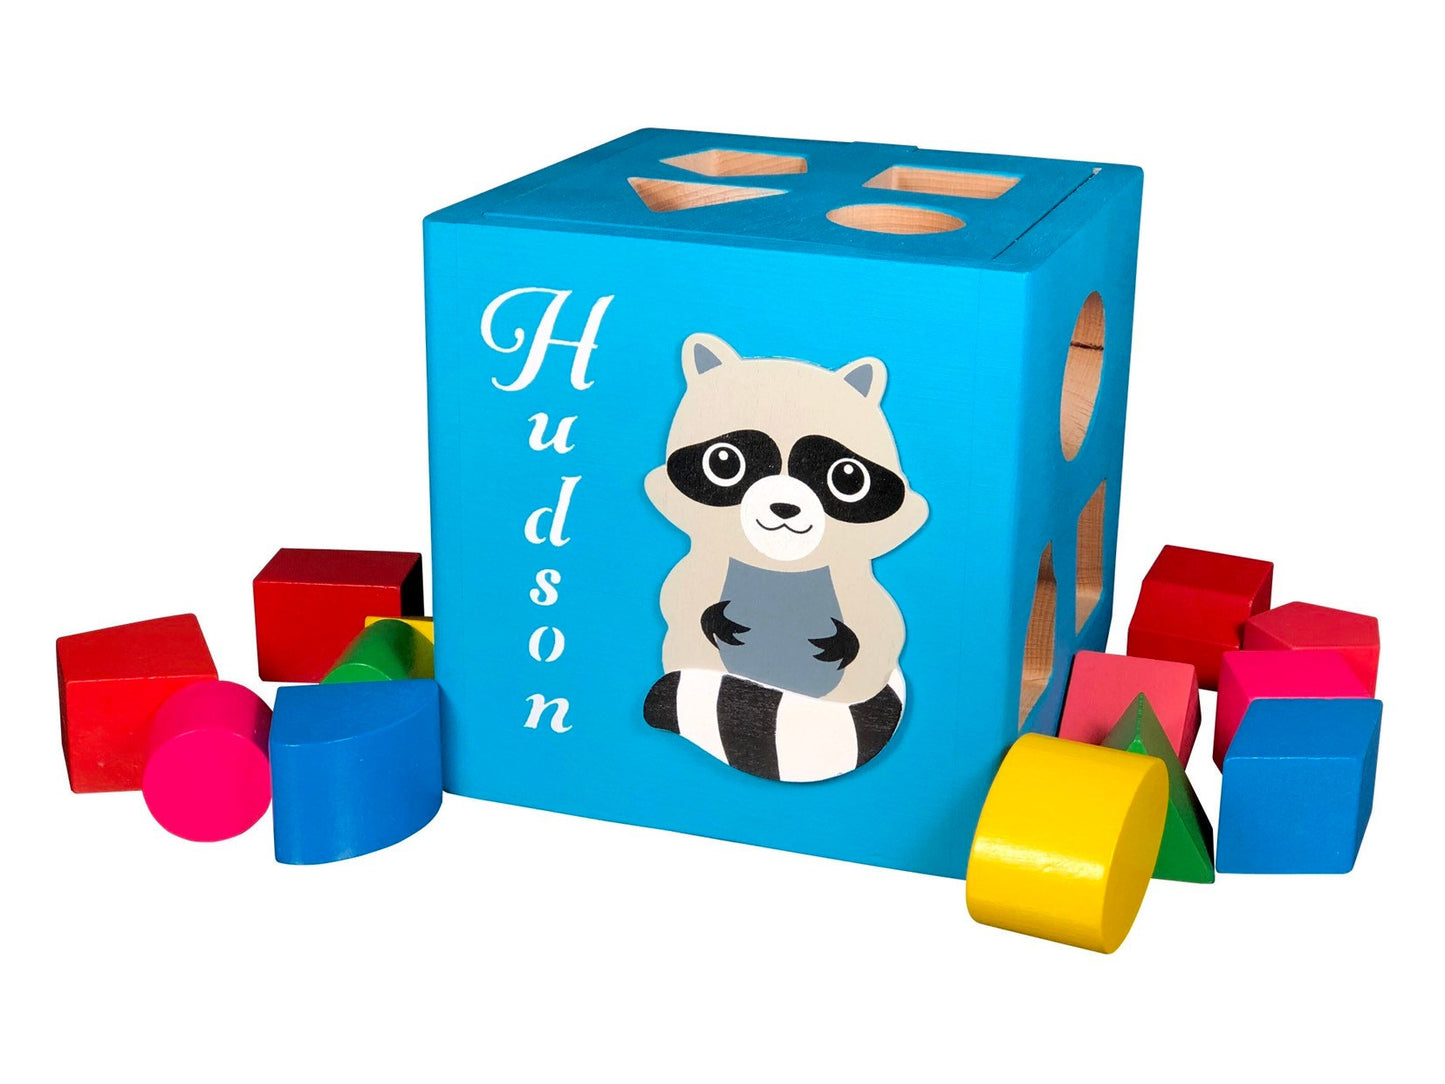 Handmade wooden baby toys / personalized baby gift / Raccoon toy